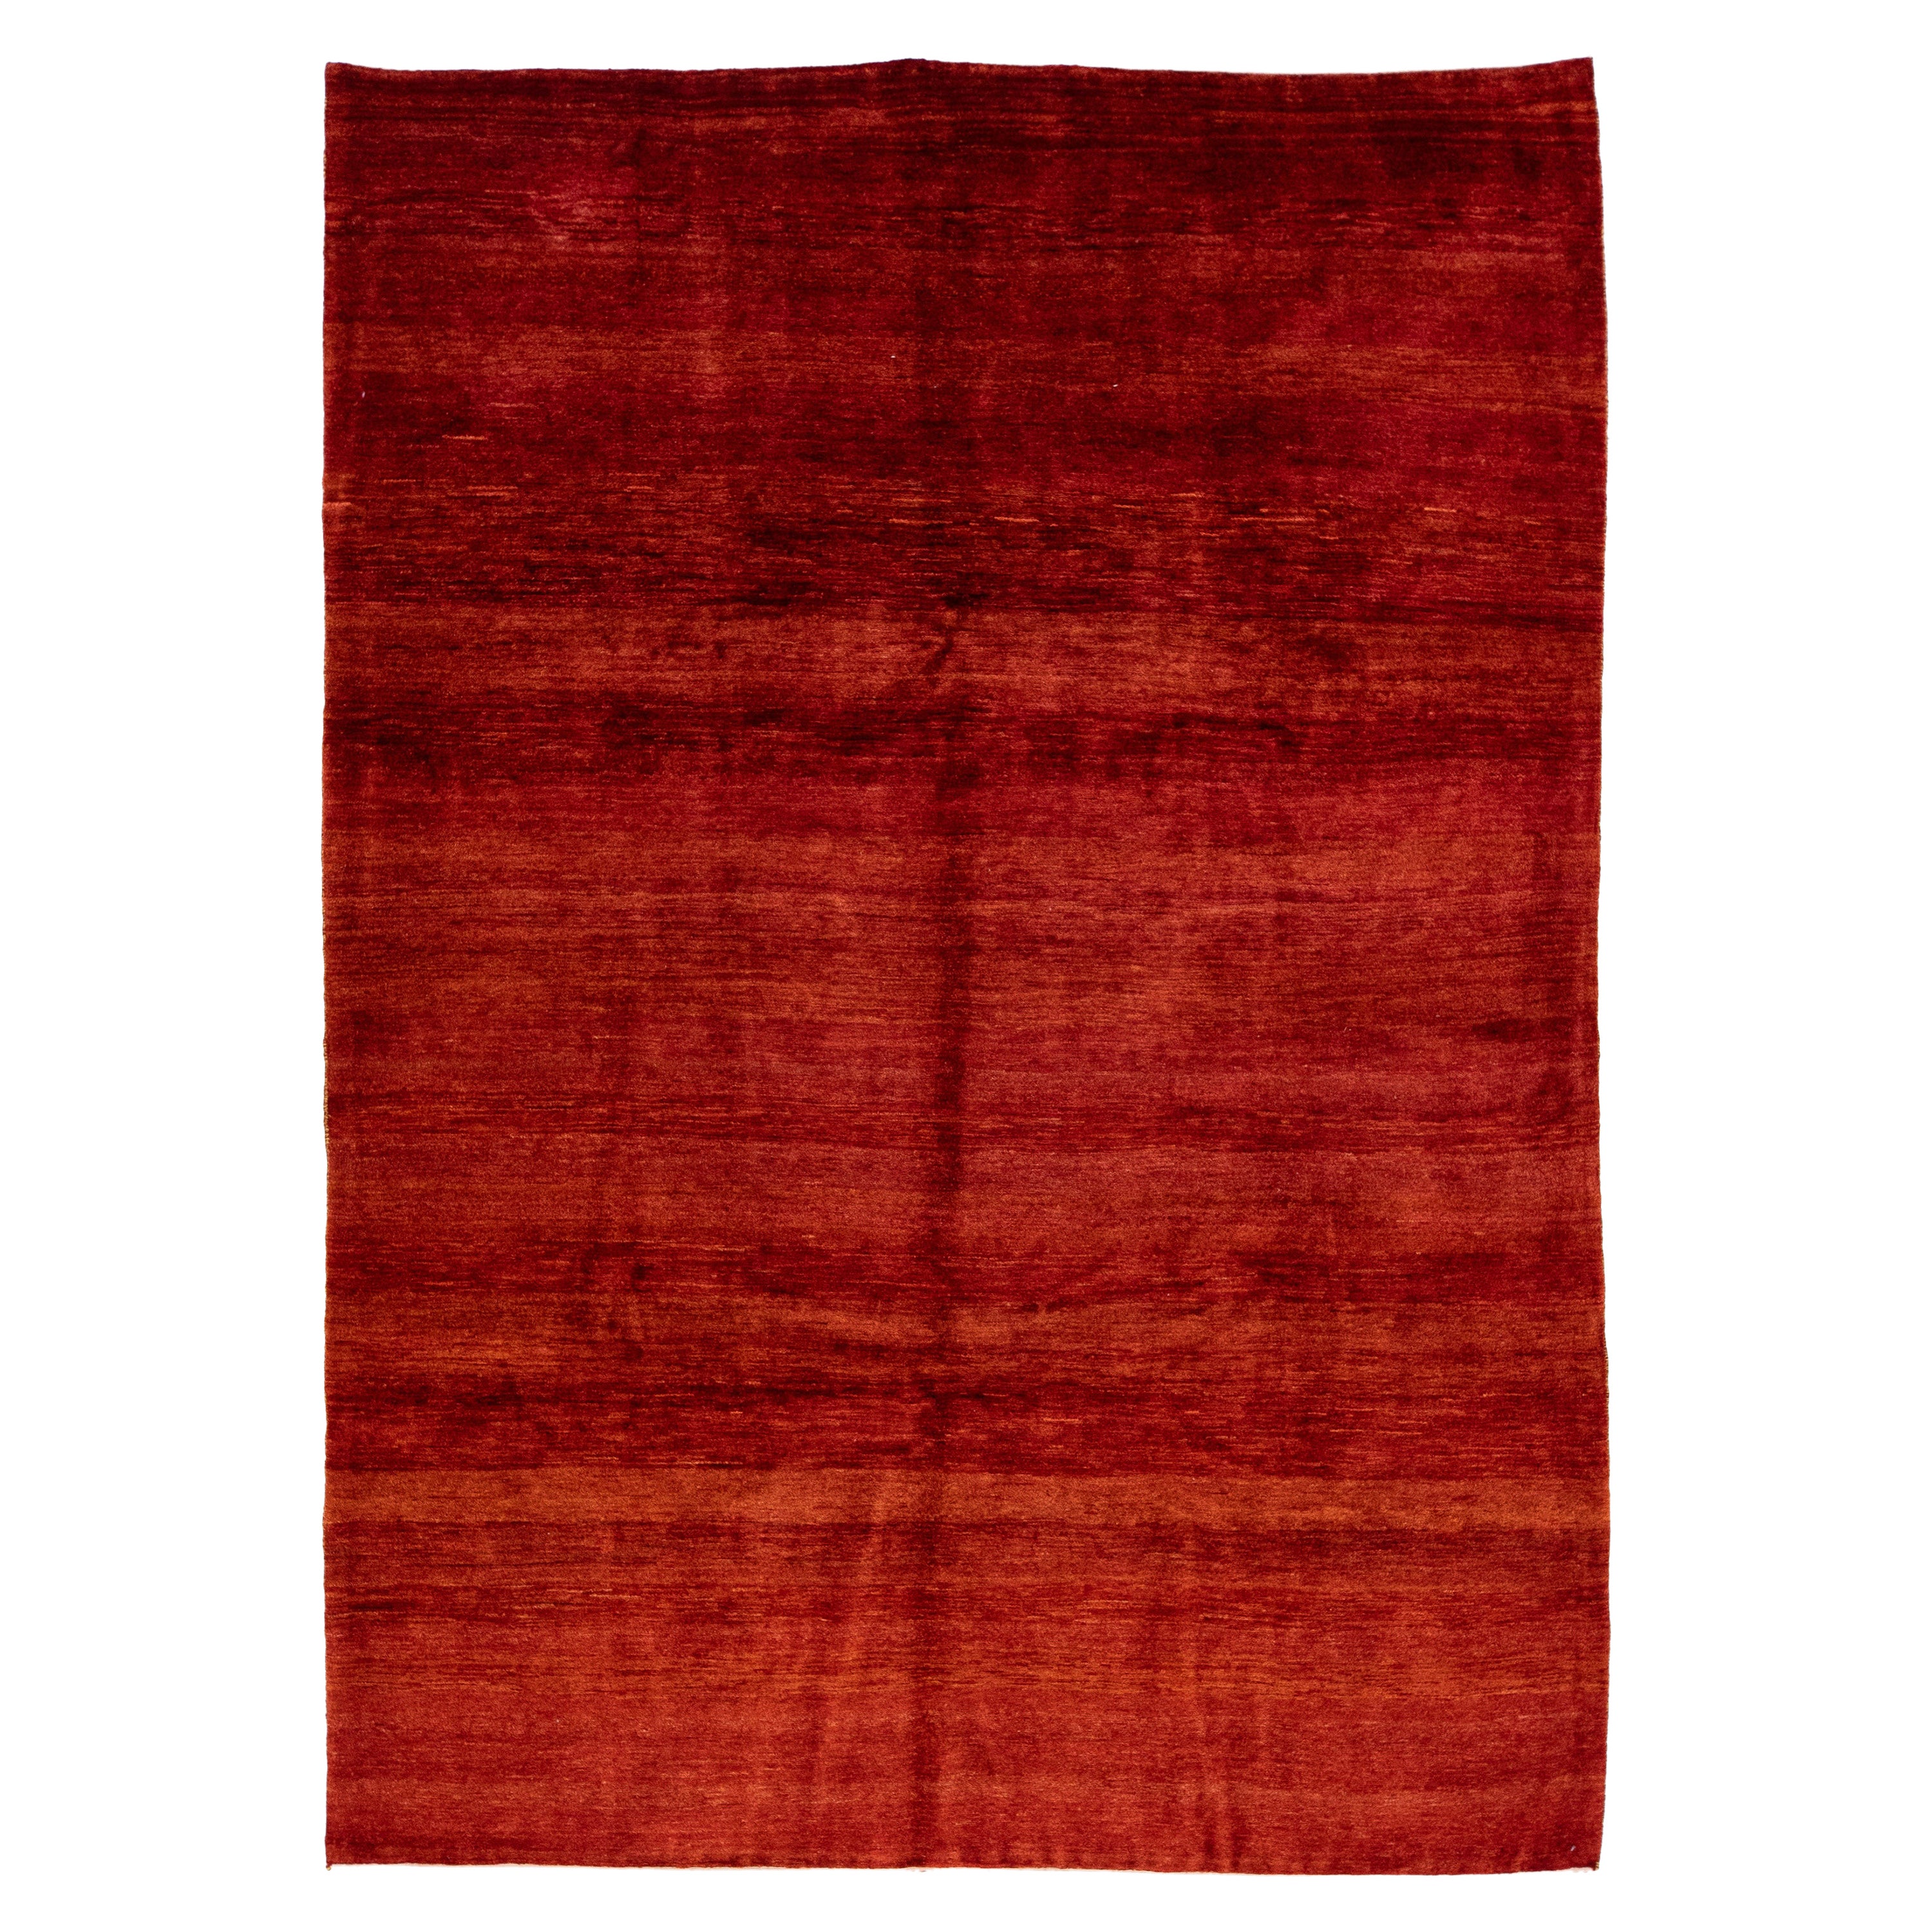  Solid Red Modern Gabbeh Style Handmade Room Size Wool Rug For Sale